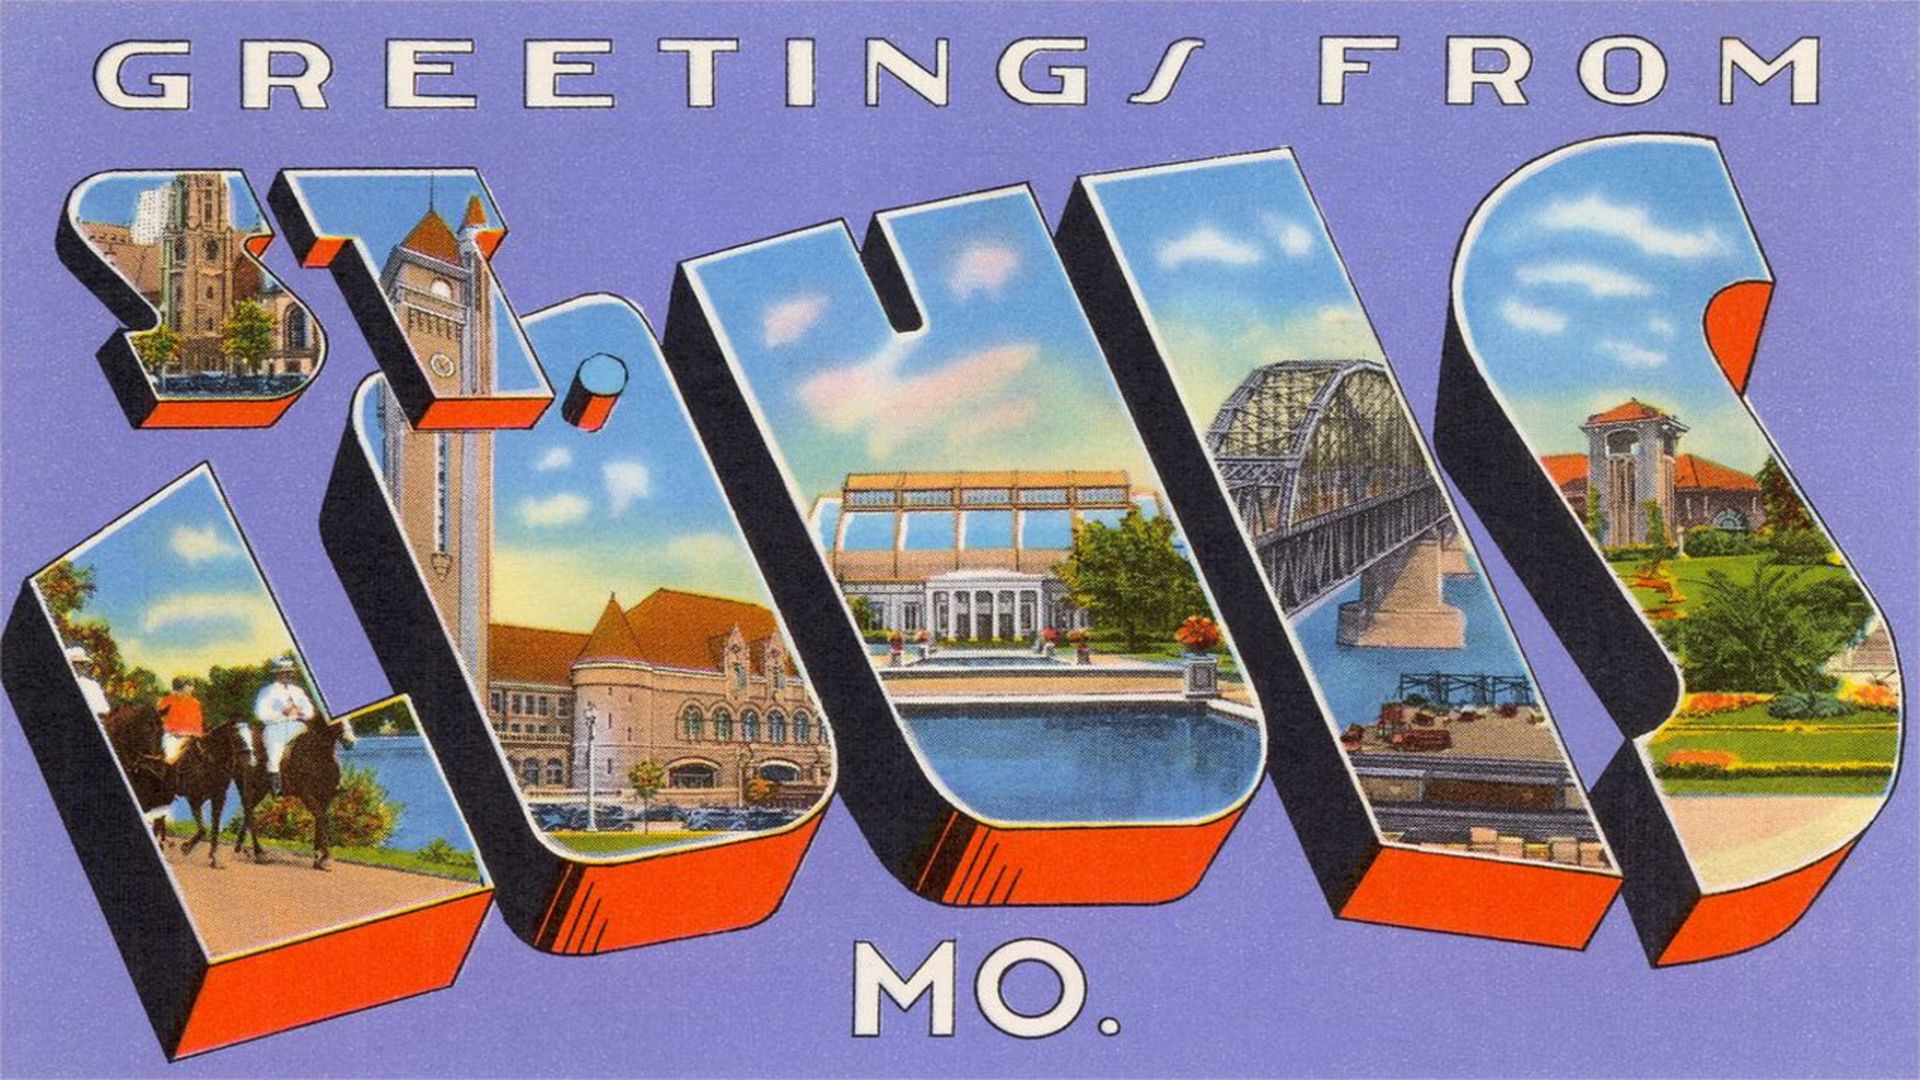 Postcard that says greetings from St. Louis Missouri